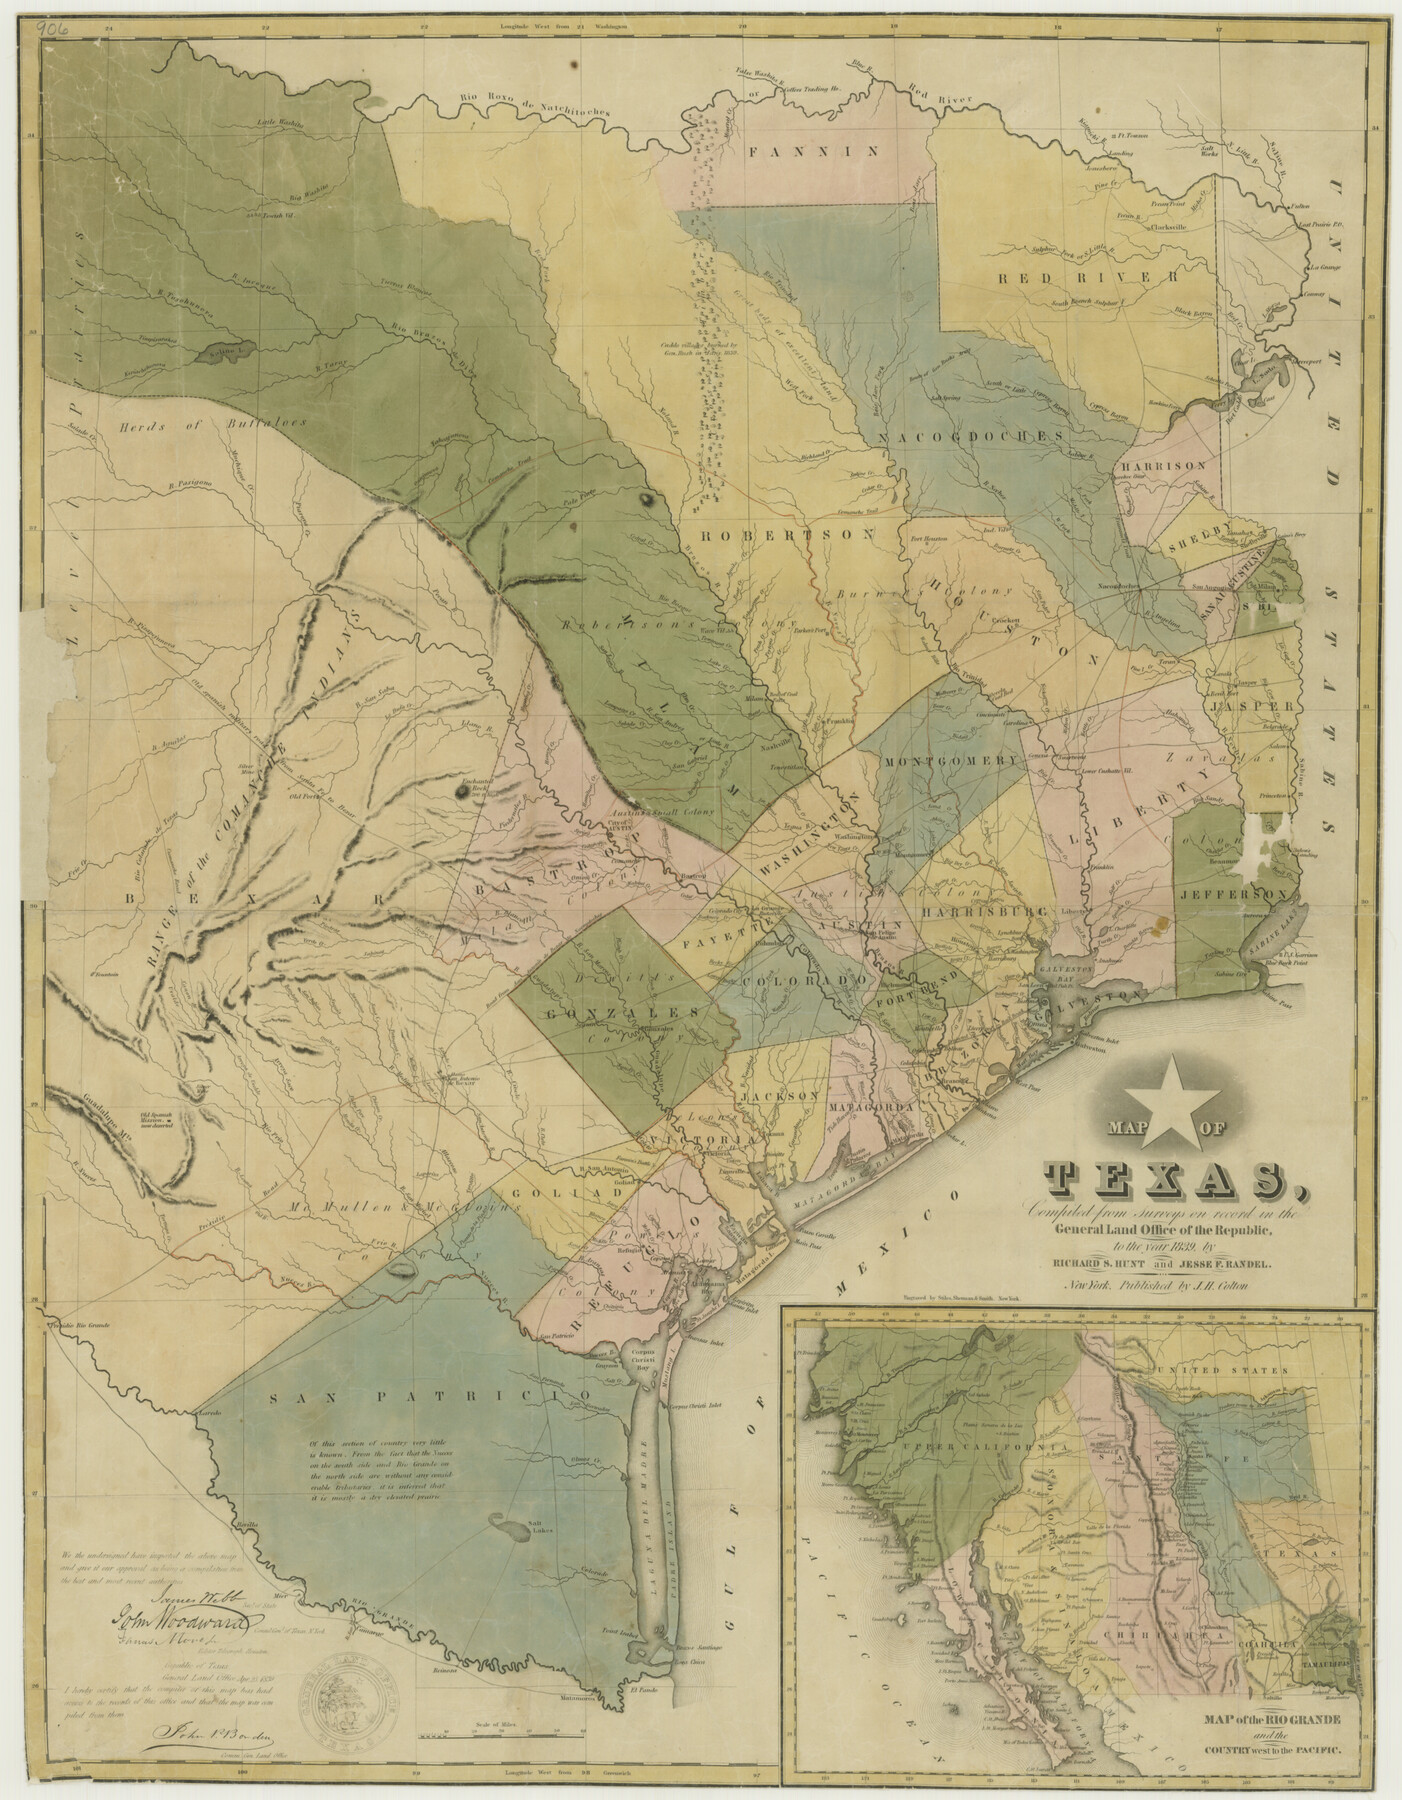 76198, Map of Texas, compiled from surveys on record in the General Land Office of the Republic, Texas State Library and Archives